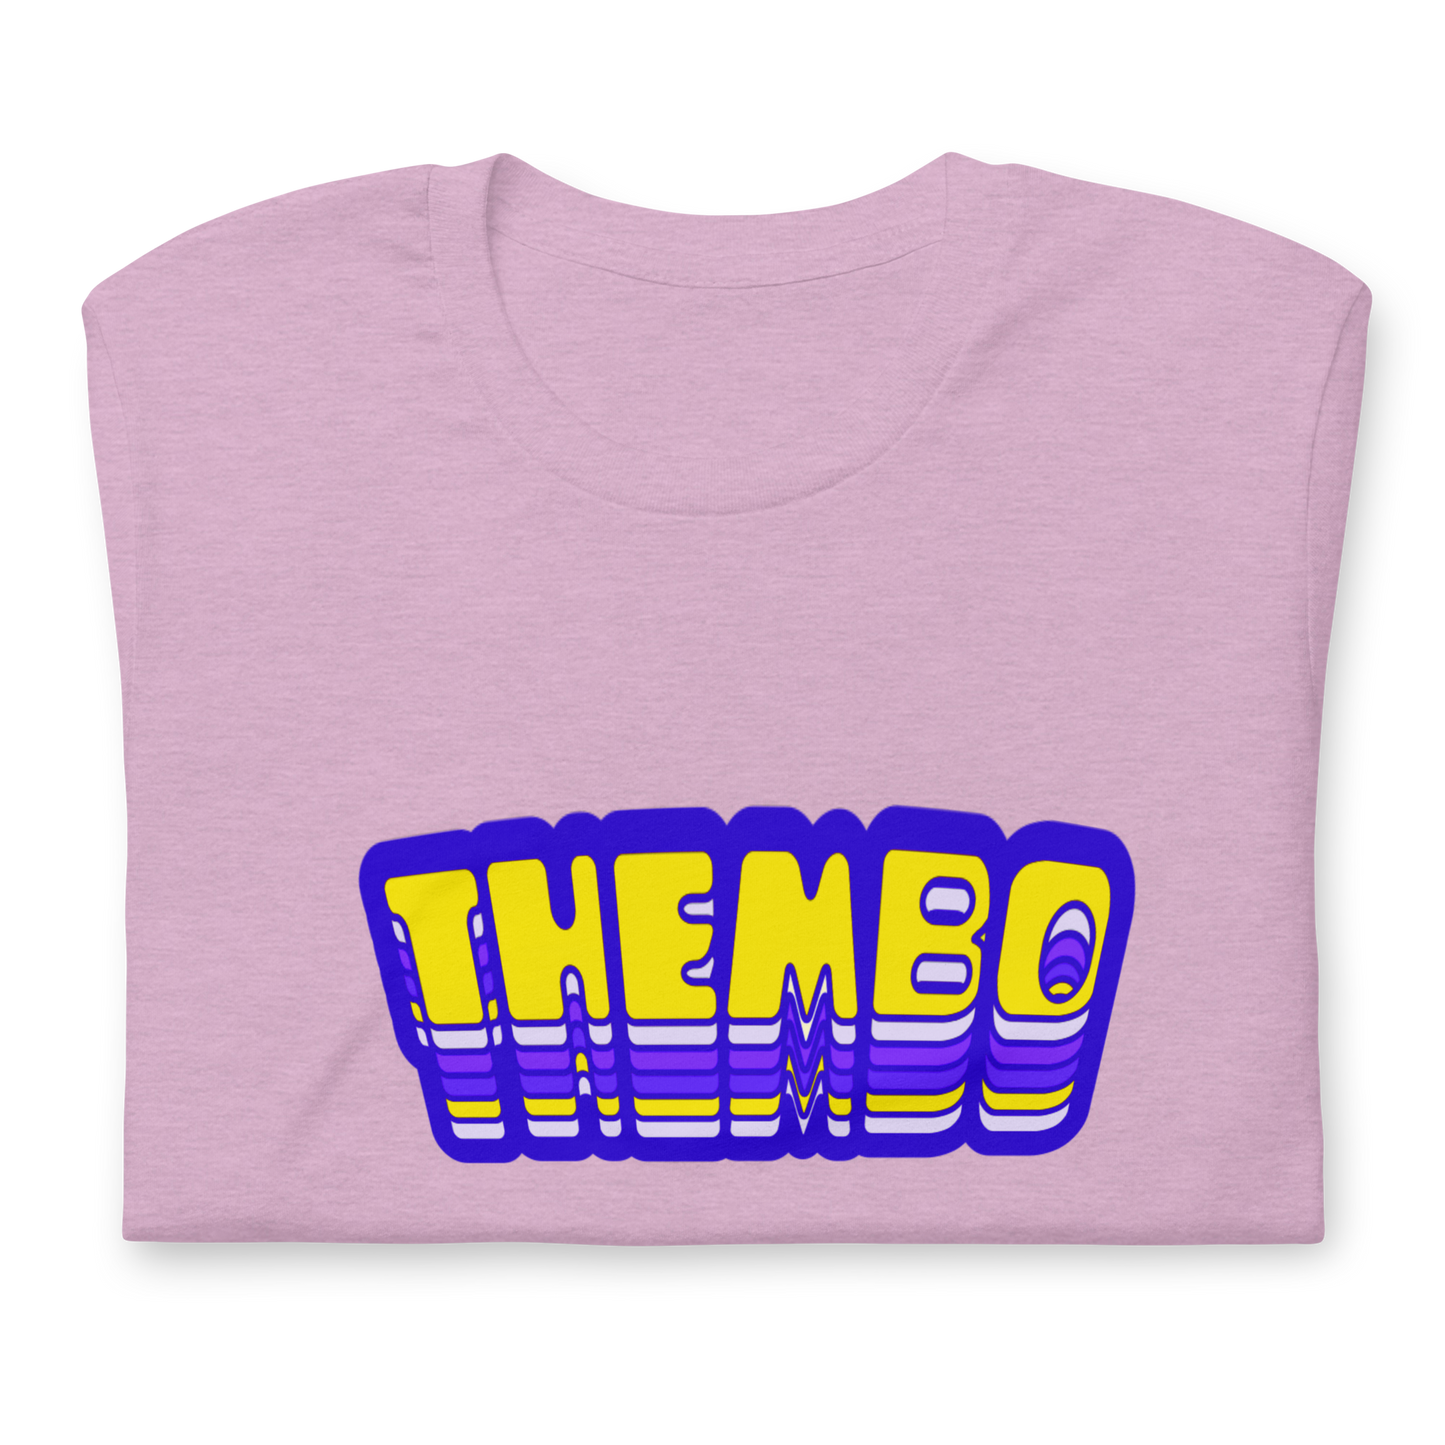 Thembo Pride Flags T-Shirt